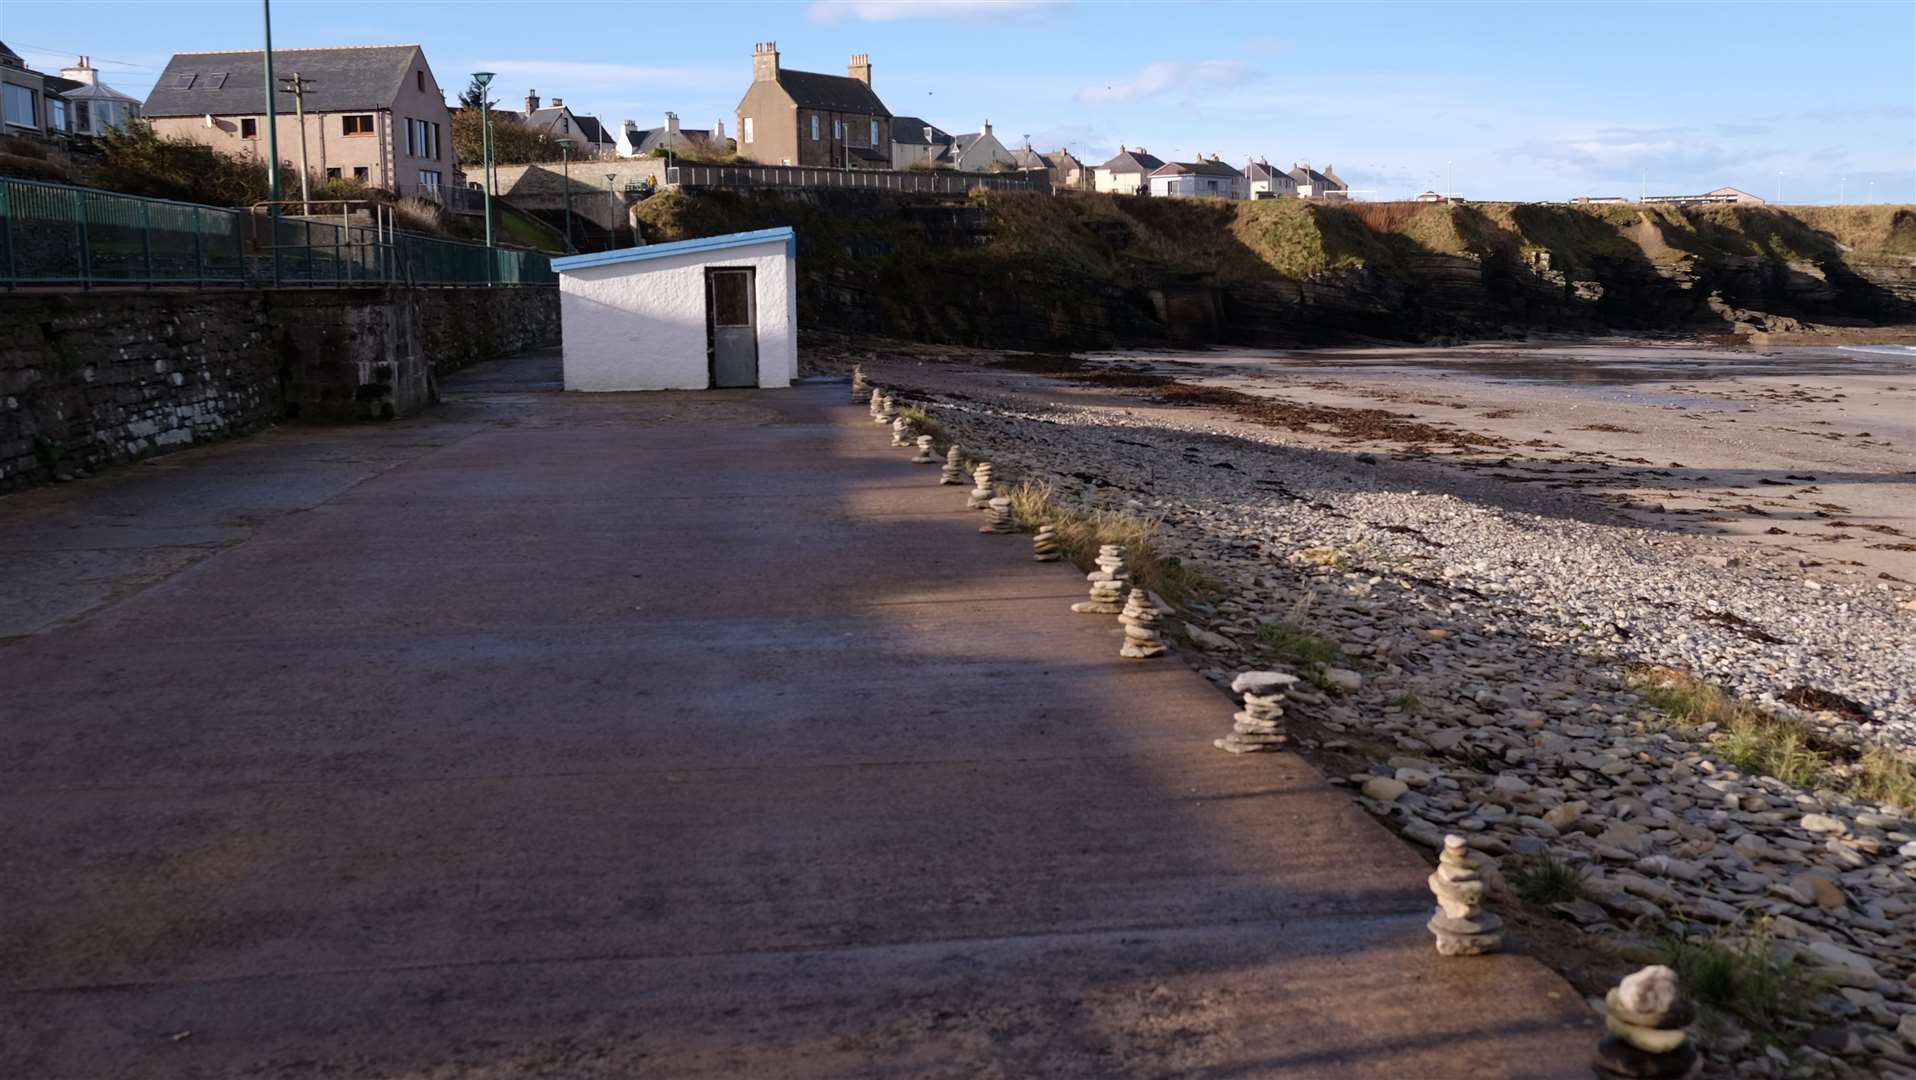 Ian Cameron took this picture at Thurso seafront showing stone towers built by two young boys, with help from their dad.